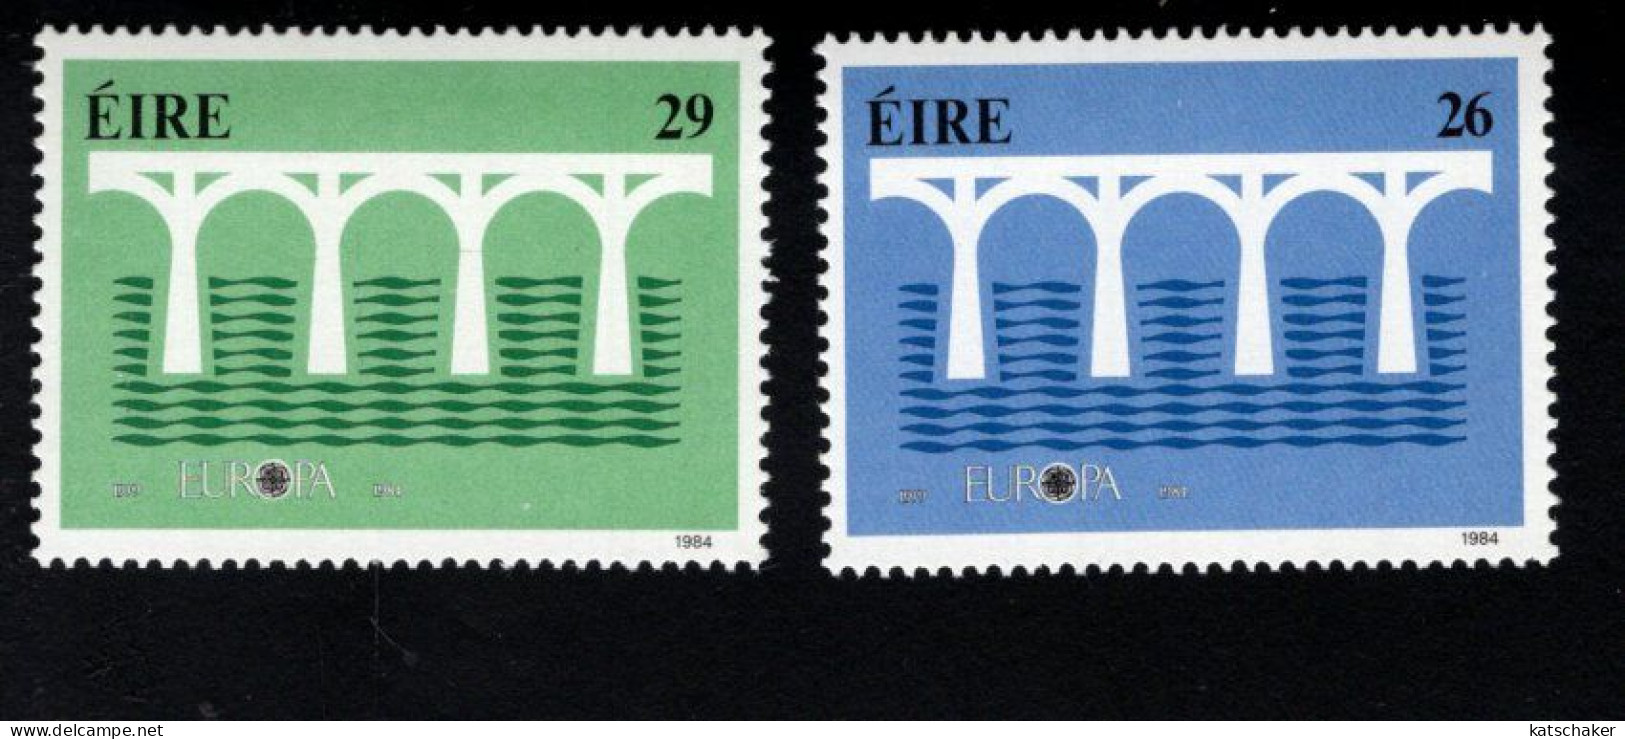 2000289833 1984  SCOTT 592 593 (XX) POSTFRIS  MINT NEVER HINGED -  EUROPA ISSUE - Unused Stamps